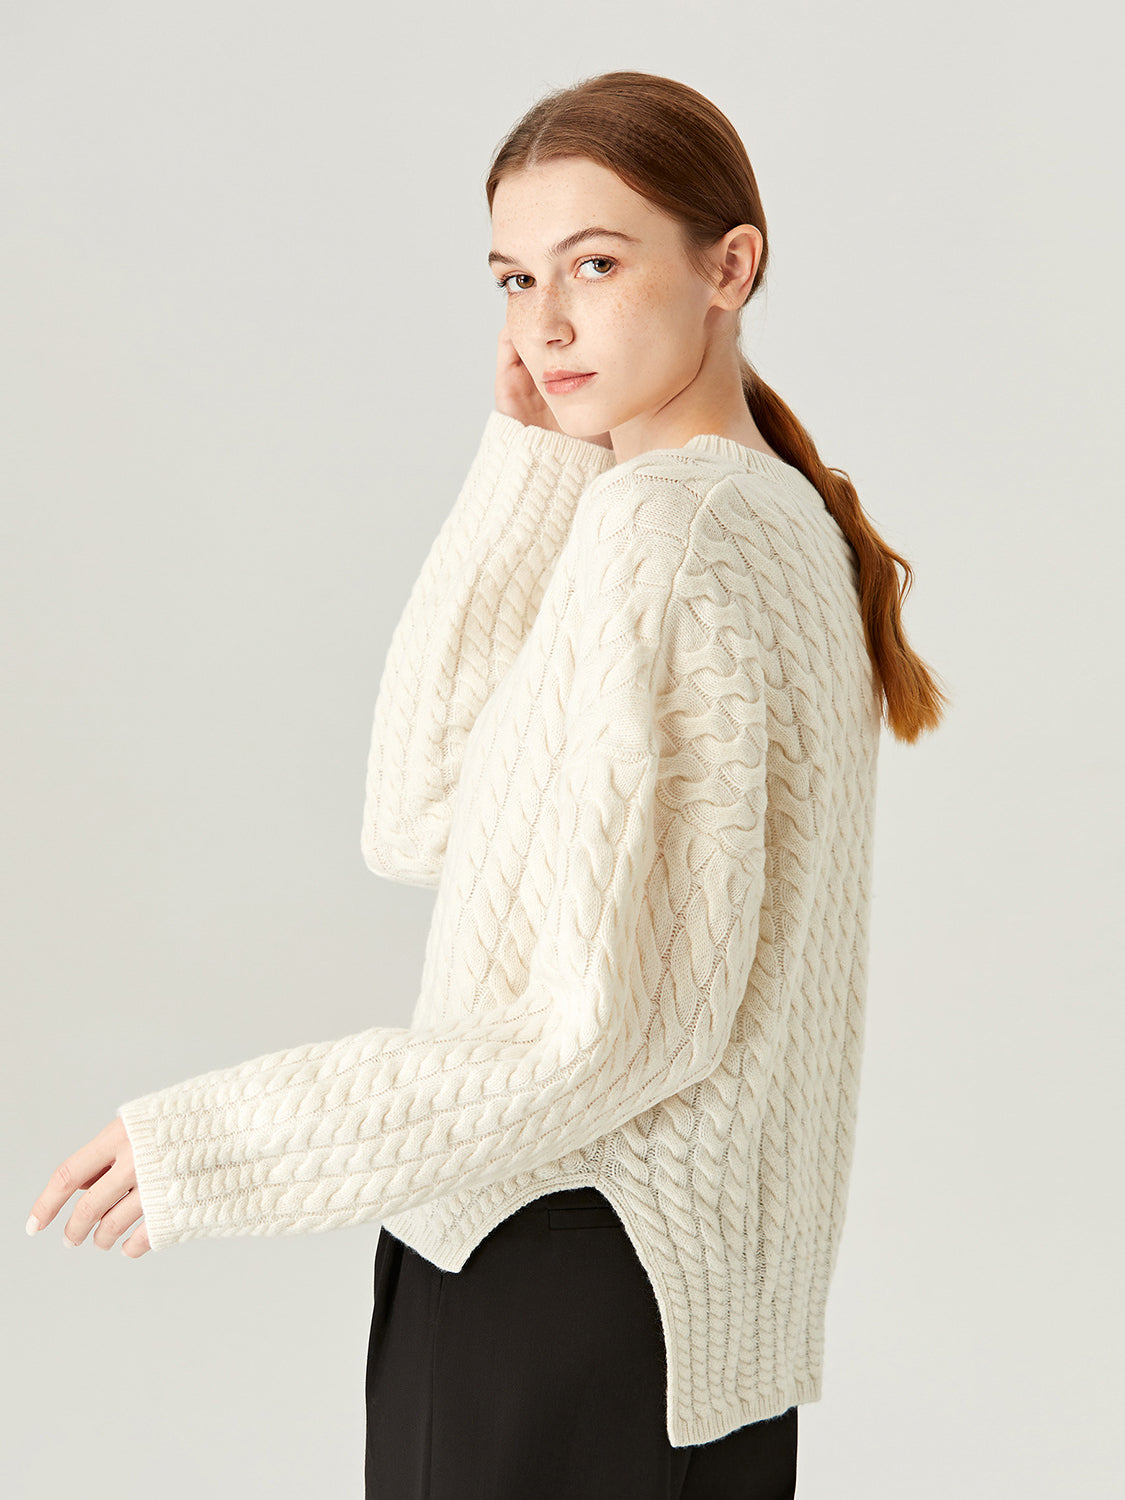 Snow Falling Cream Patchwork Knit Long Sleeve Wool Sweater